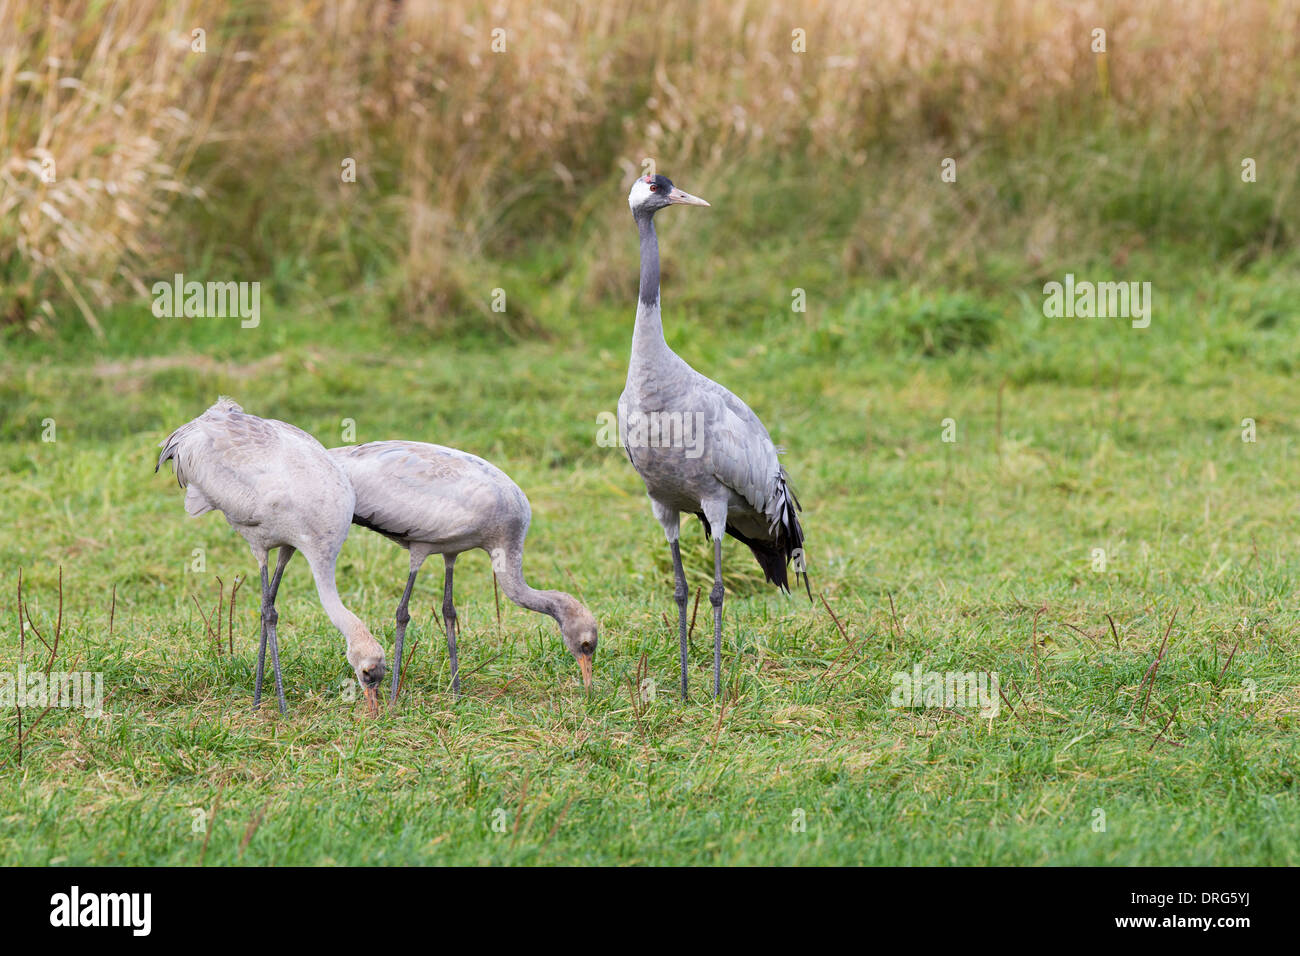 Grauer Kranich, Grus grus, Eurasian Cranes, Common cranes, family with two chicks and parent, Germany Stock Photo